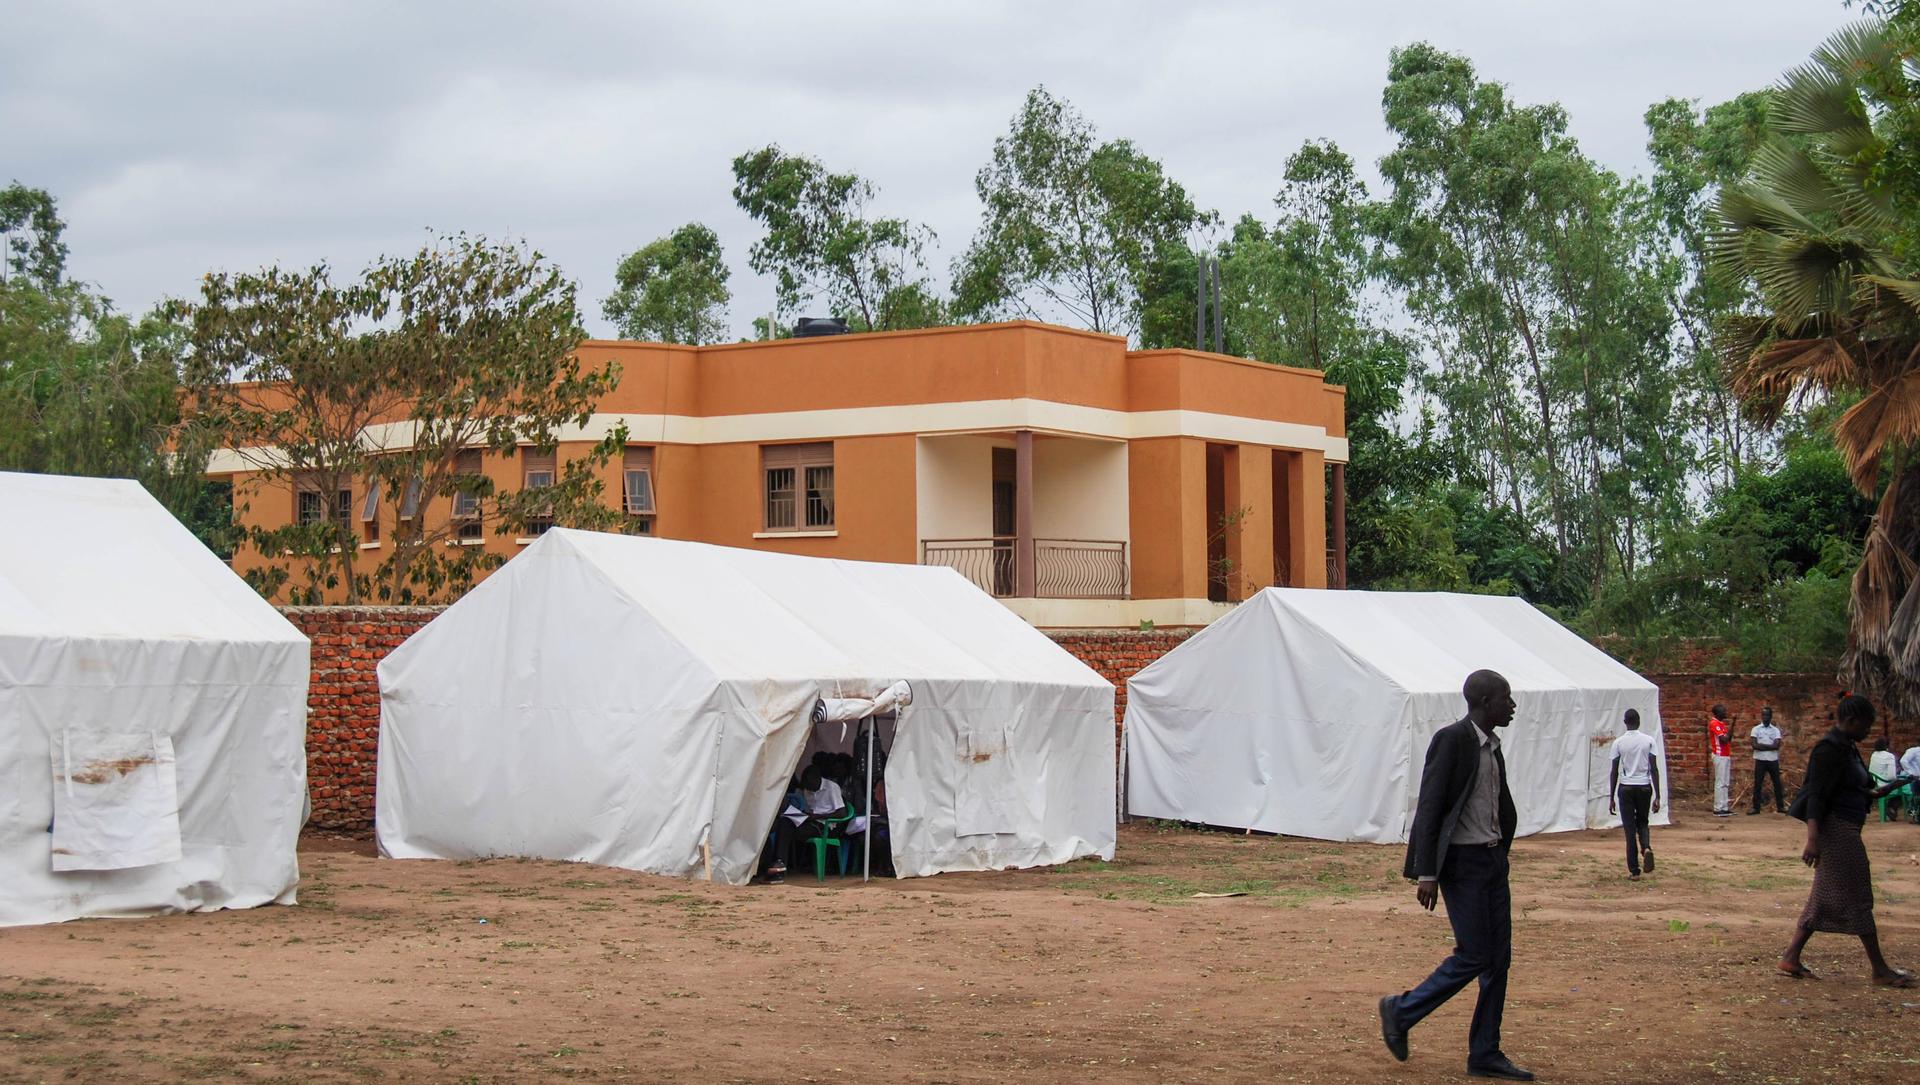 The new Uganda compound of the Kajo Keji Health Training Institute is roughly one-quarter the size of the previous location in South Sudan.